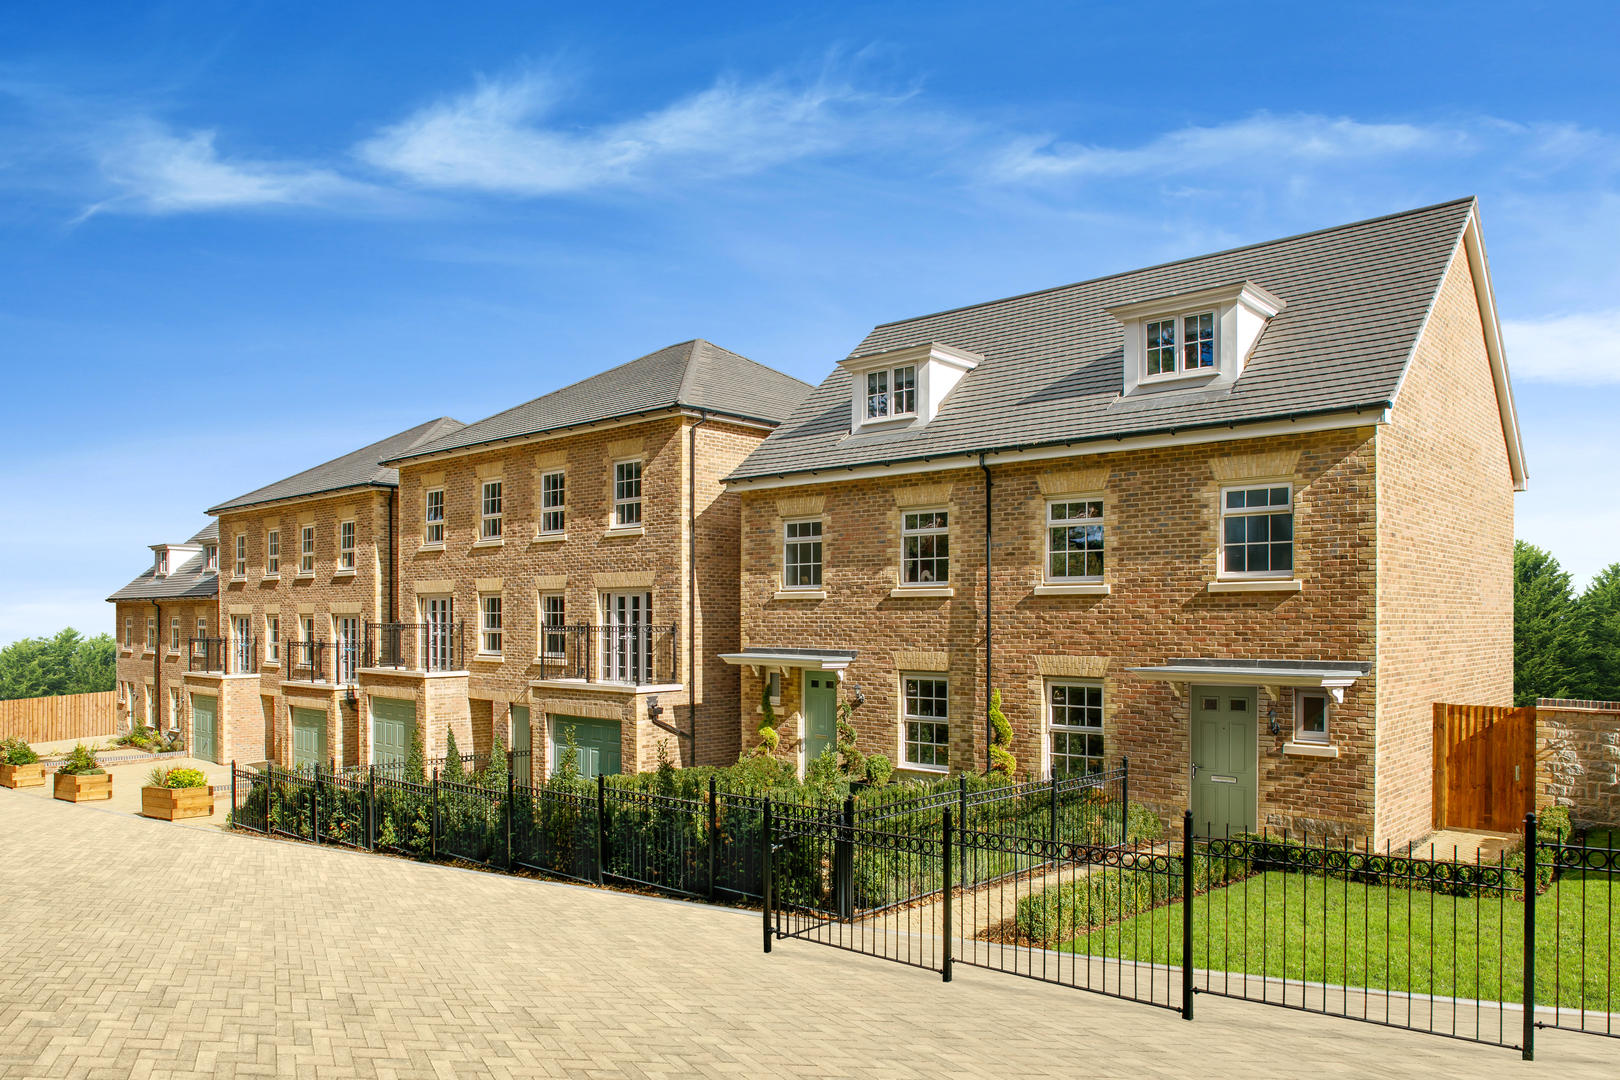 Redrow Homes - The Mill